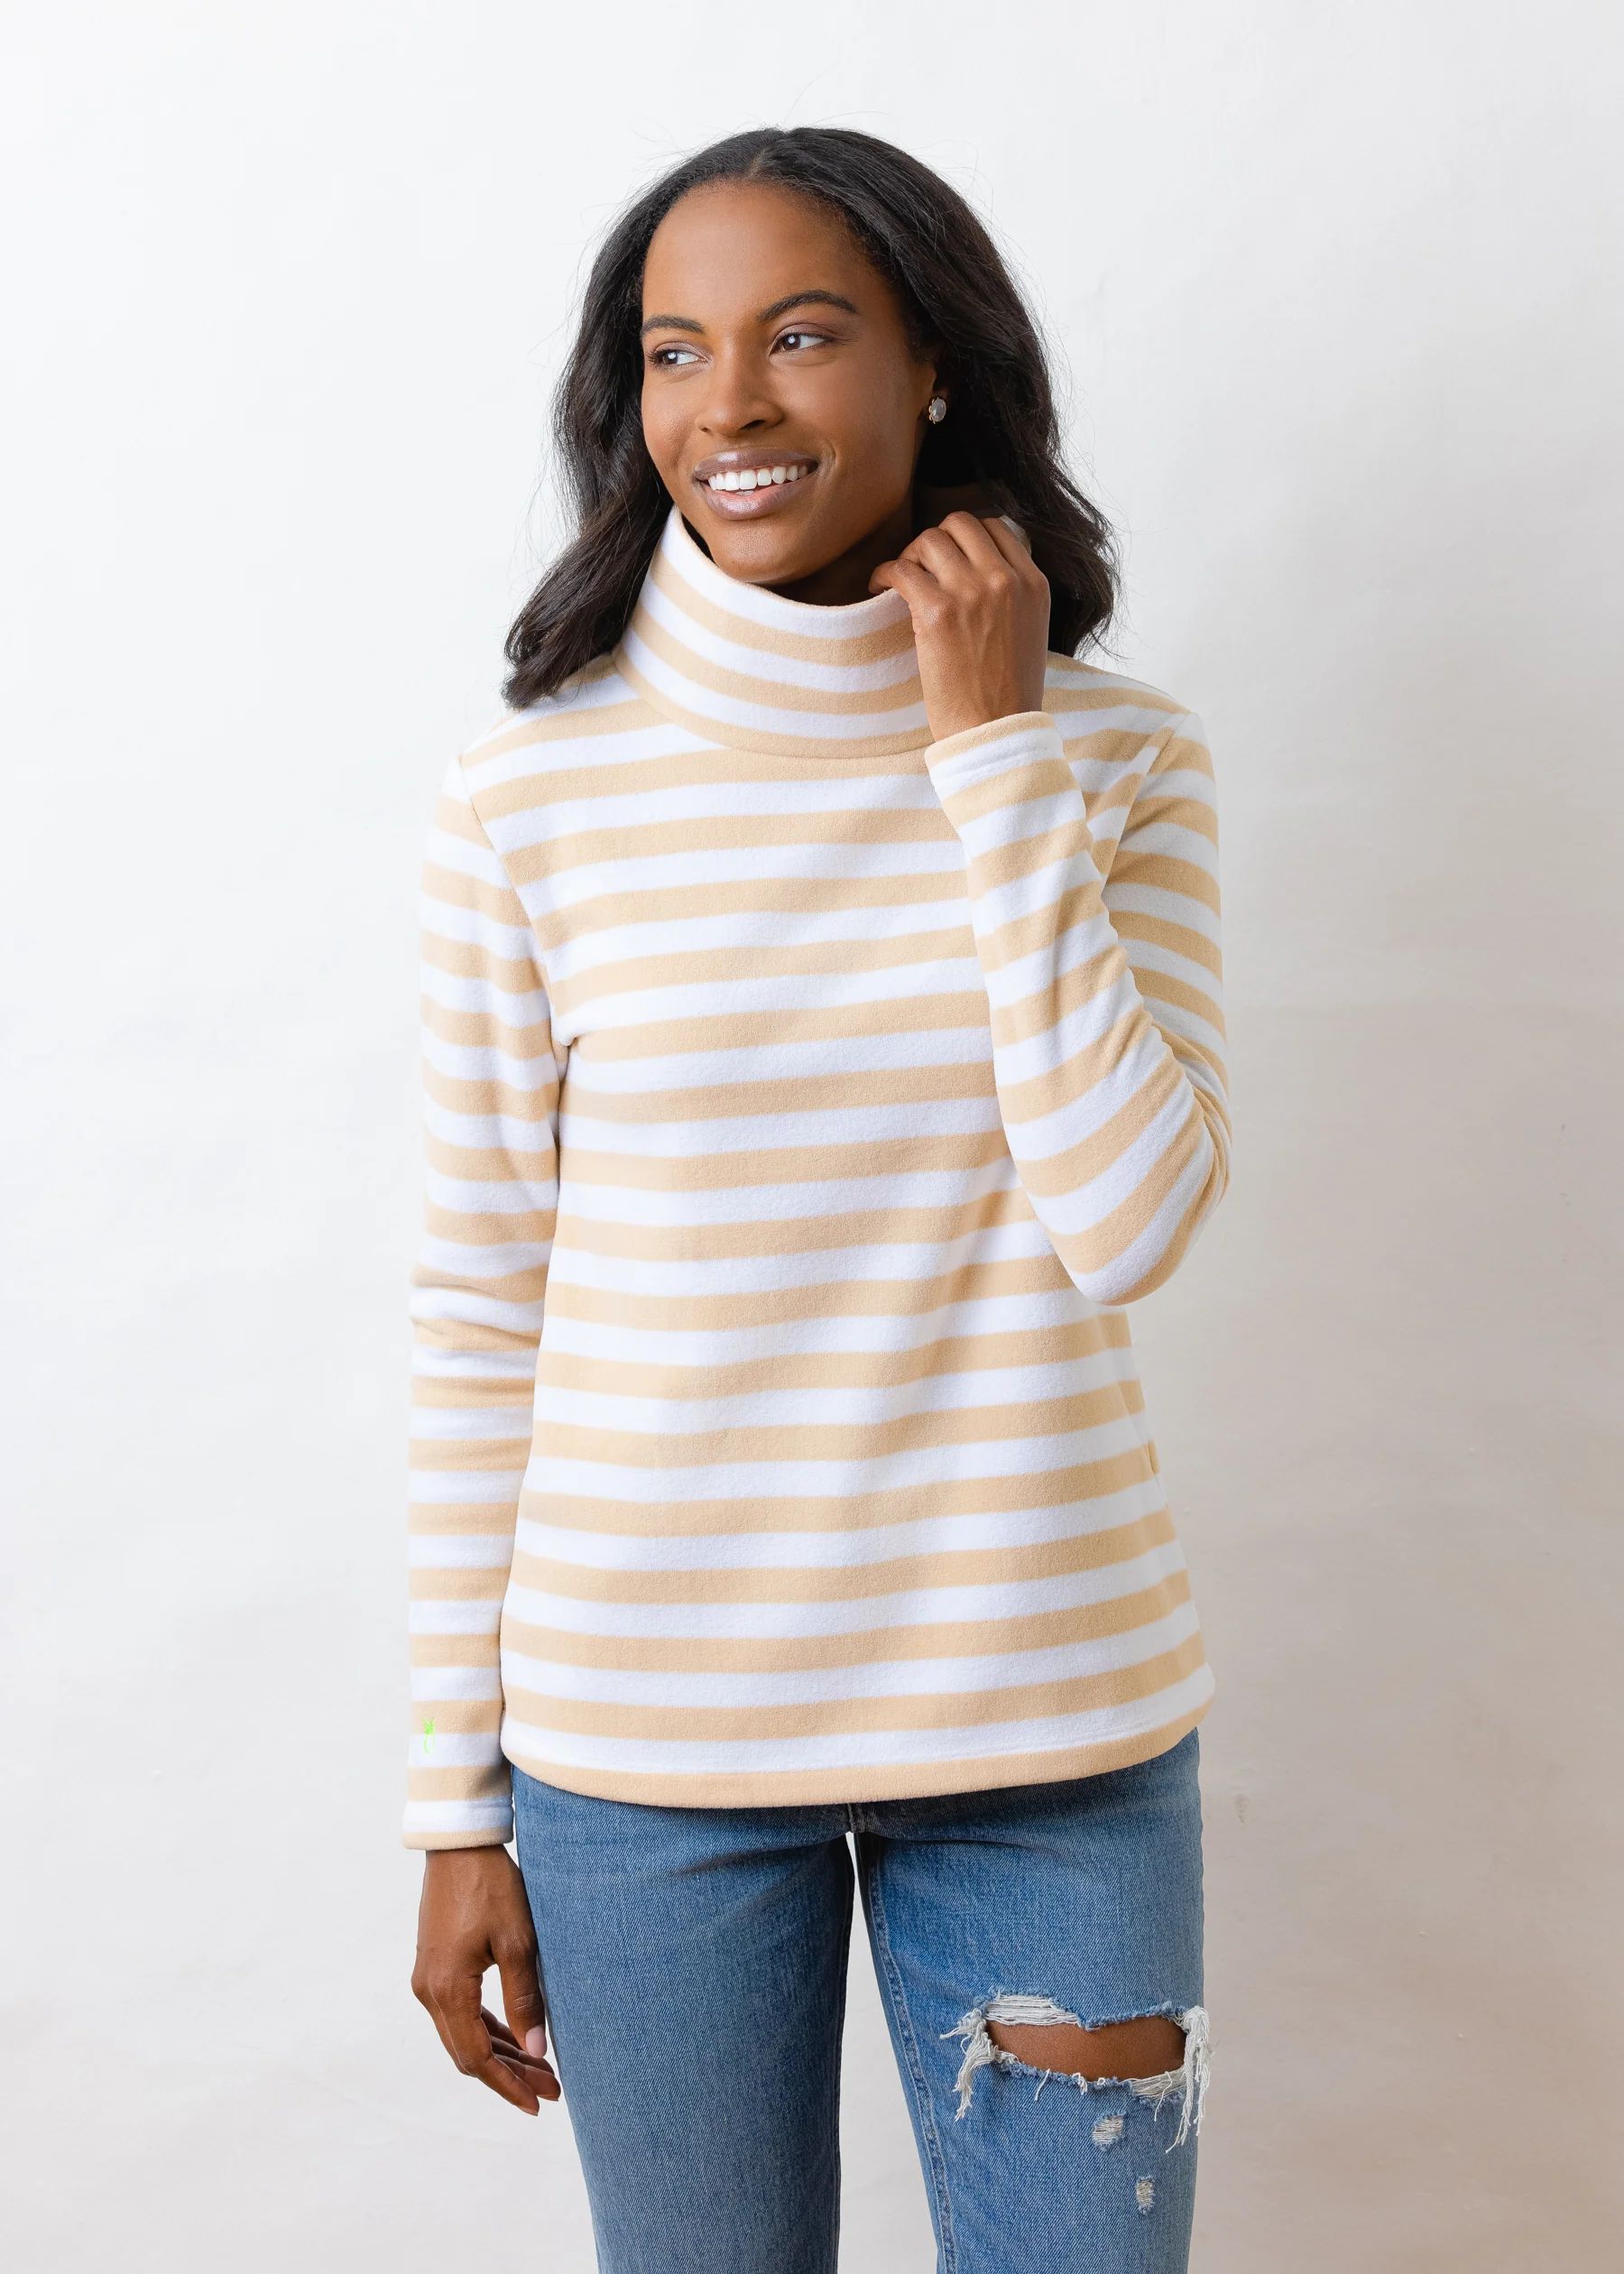 Greenpoint Turtleneck in Striped Fleece (Natural Blush / White) | Dudley Stephens